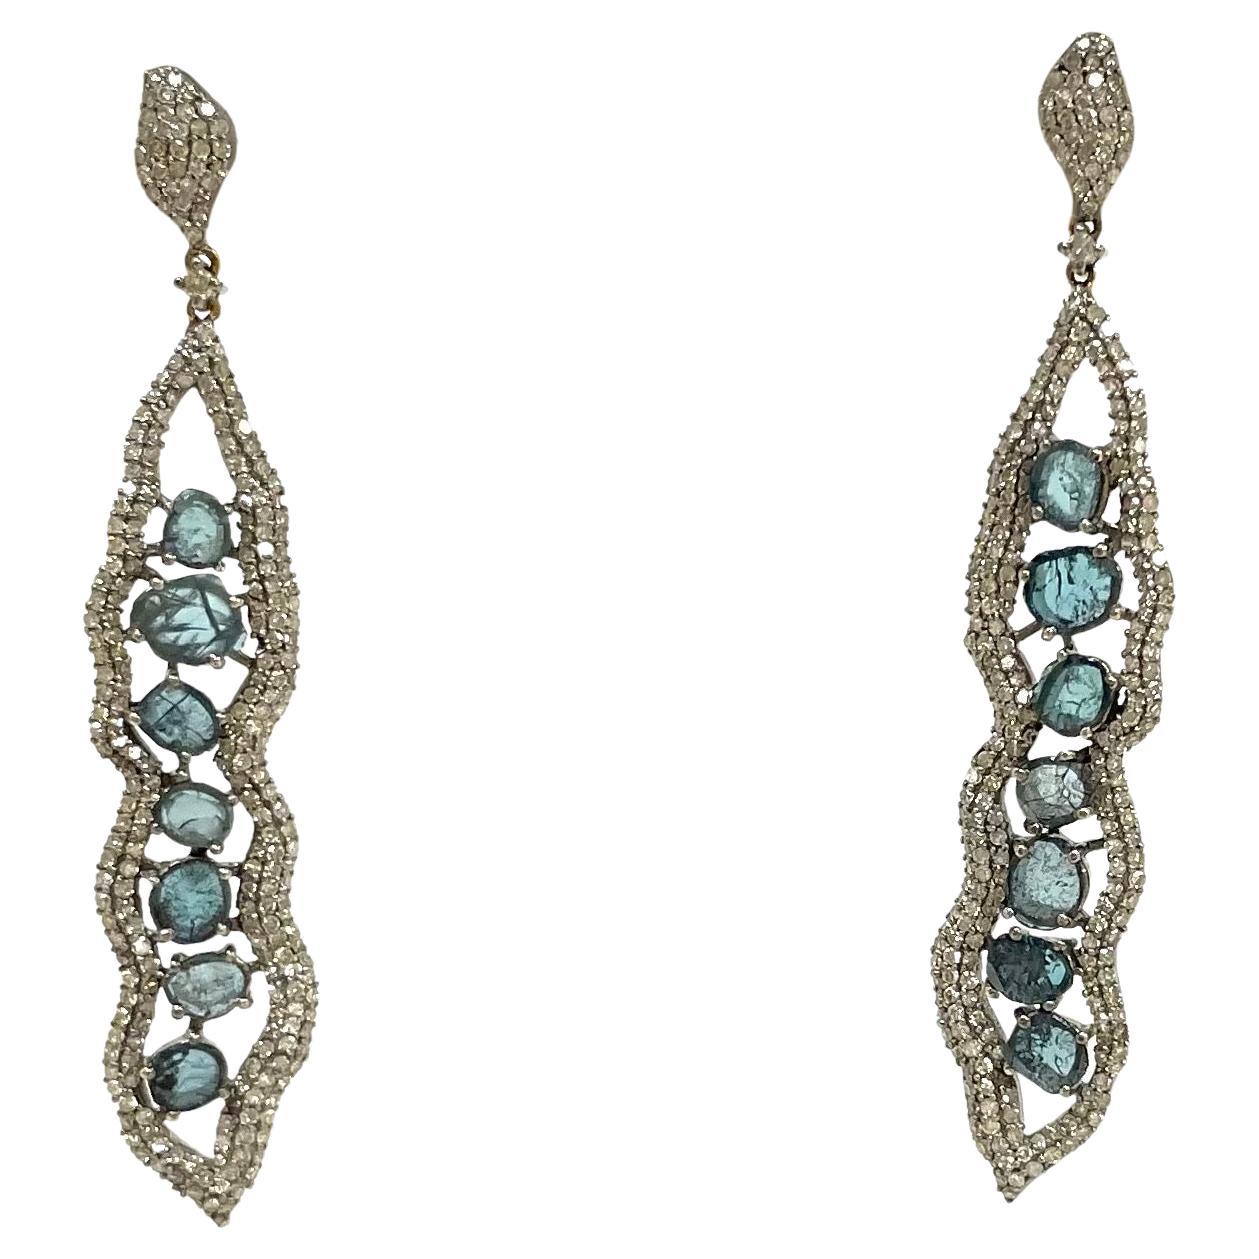 Description
Gorgeous, edgy yet feminine, blue diamond slices, framed in an artistic setting of pave diamonds.

Item # E3273

Materials and Weight
Blue diamonds, 14 pieces, slices
Pave diamonds
Rhodium sterling silver
14k gold posts and jumbo